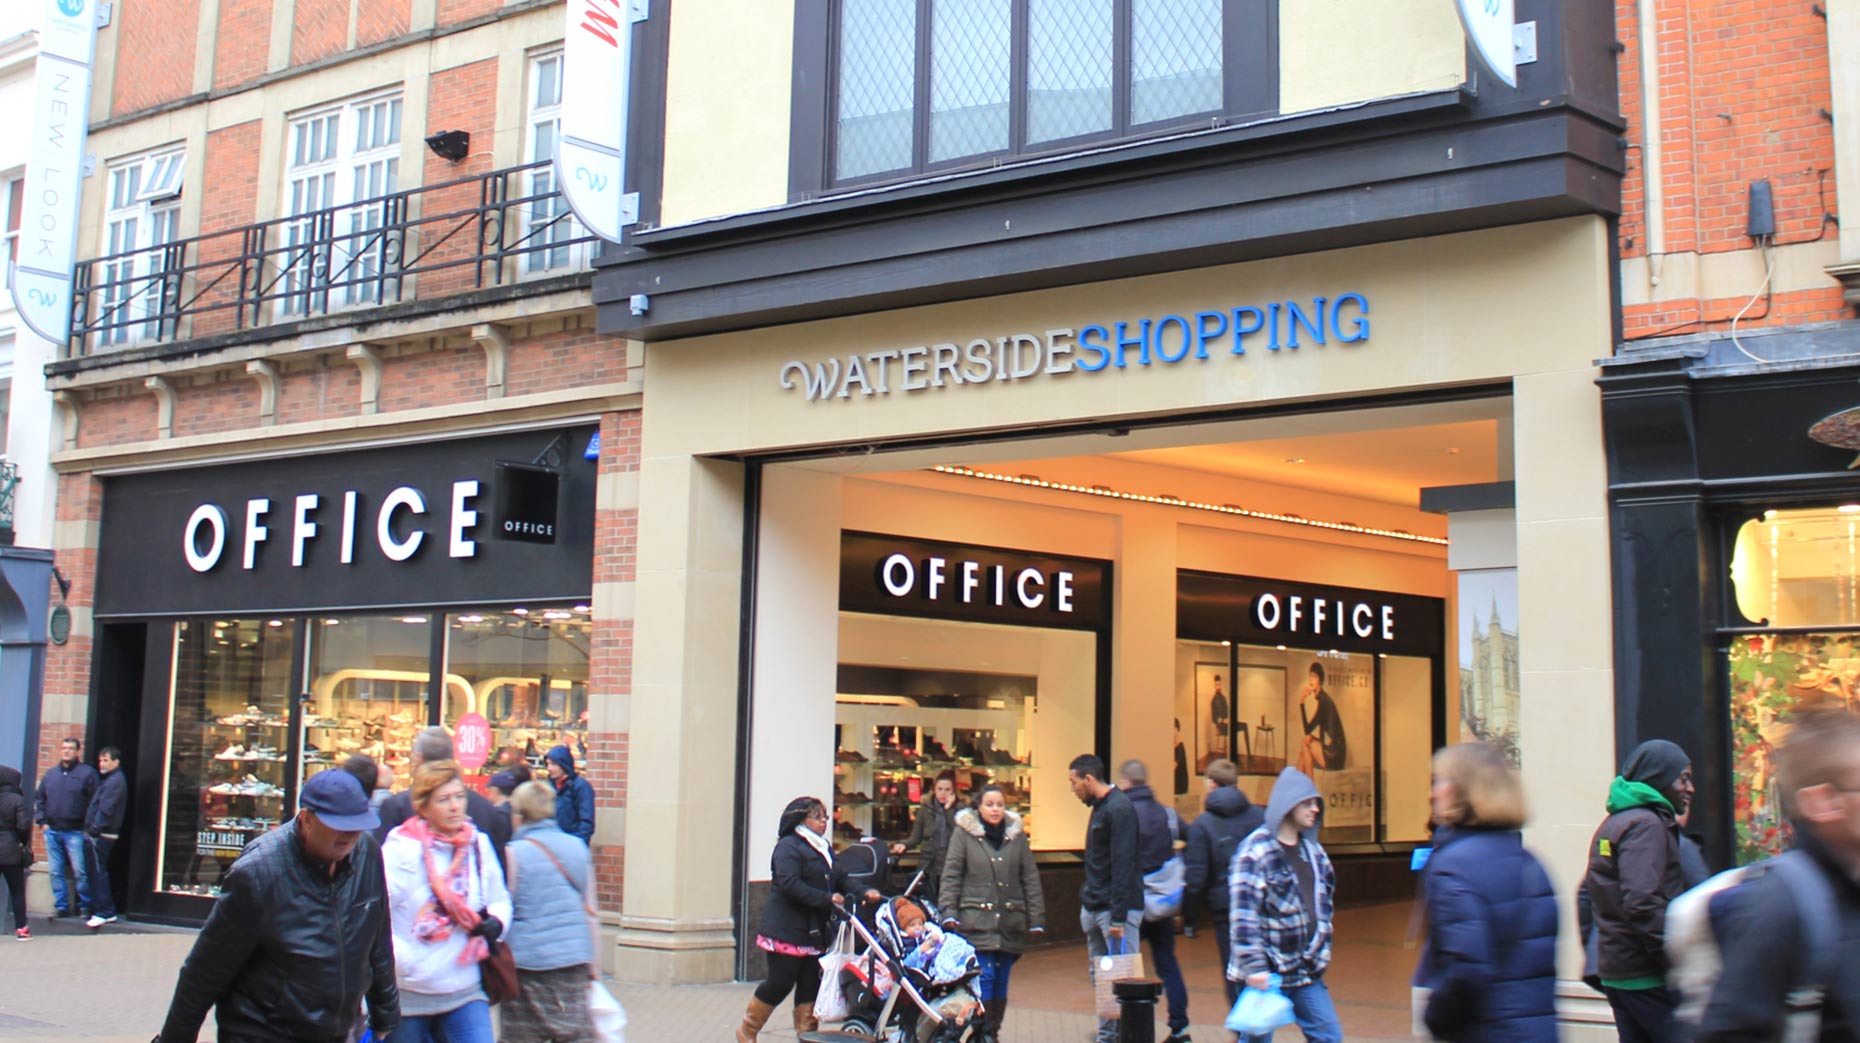 The Waterside Shopping Centre has now completed its £9 million redevelopment.